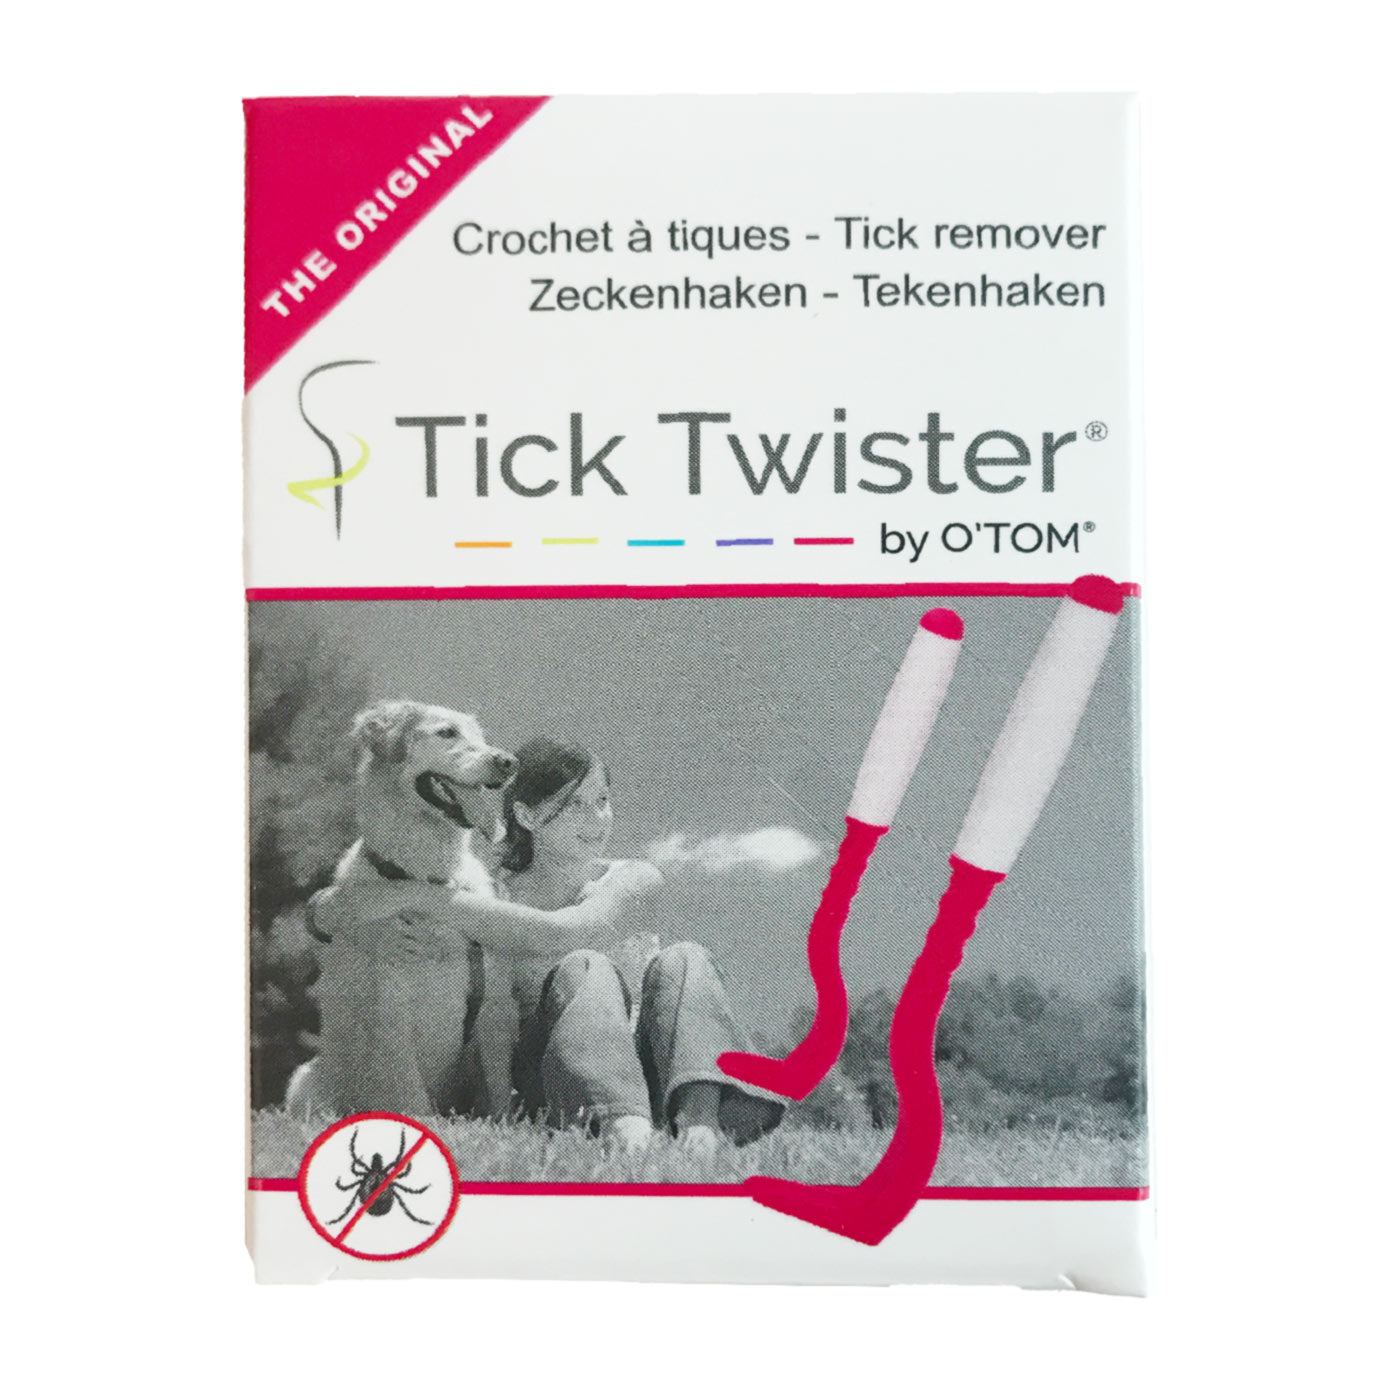 Tick twister package front view